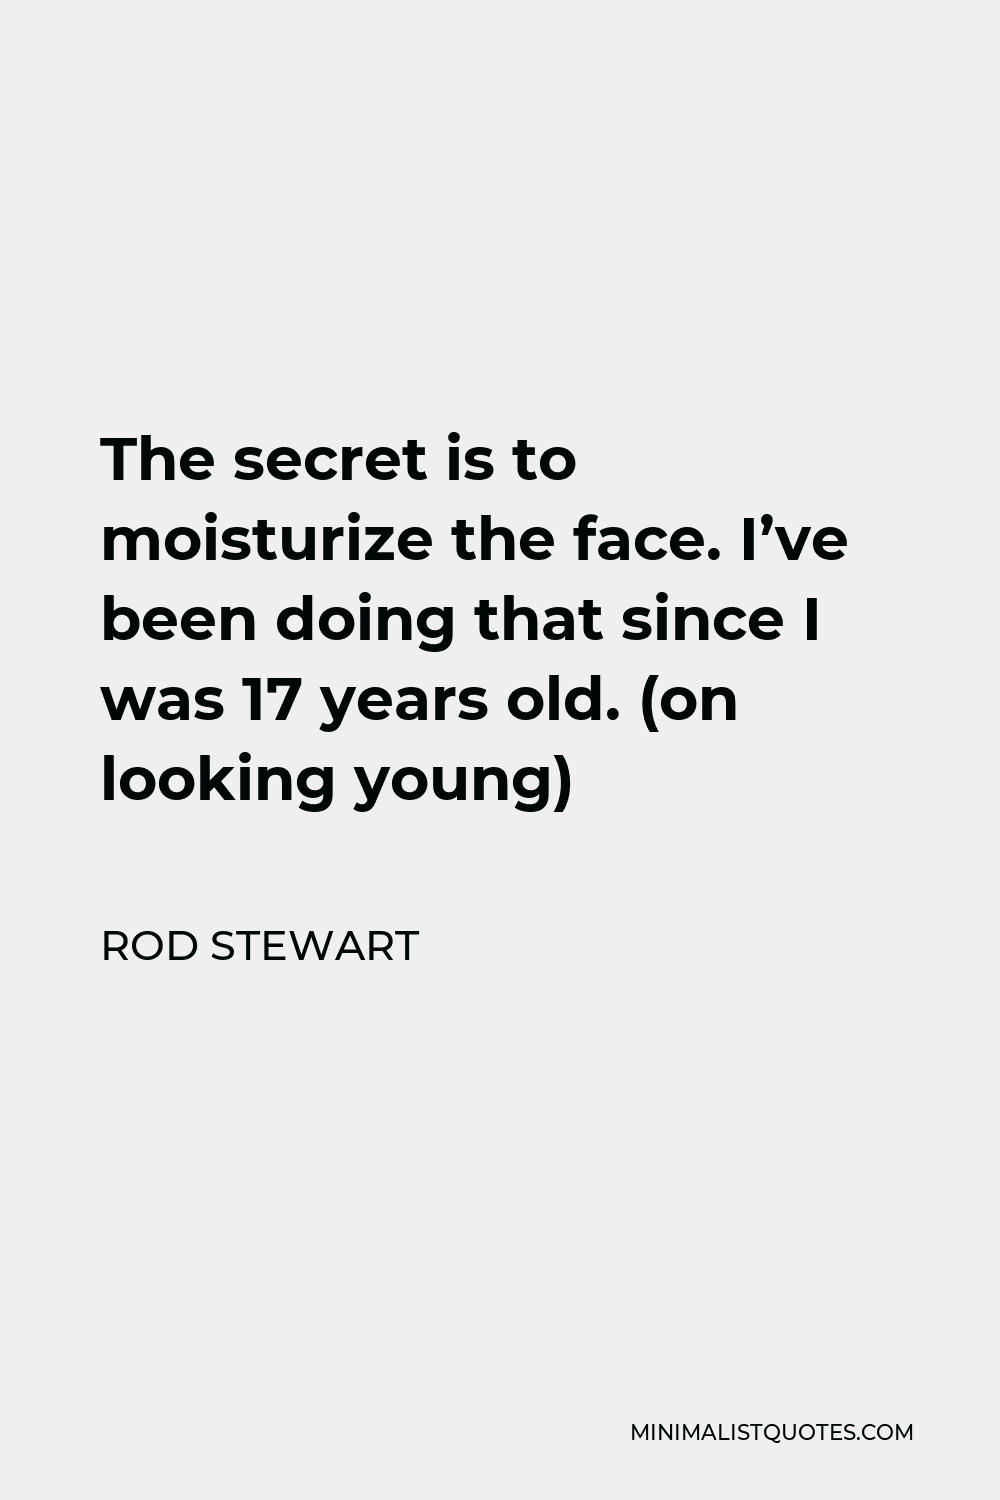 Rod Stewart Quote - The secret is to moisturize the face. I’ve been doing that since I was 17 years old. (on looking young)